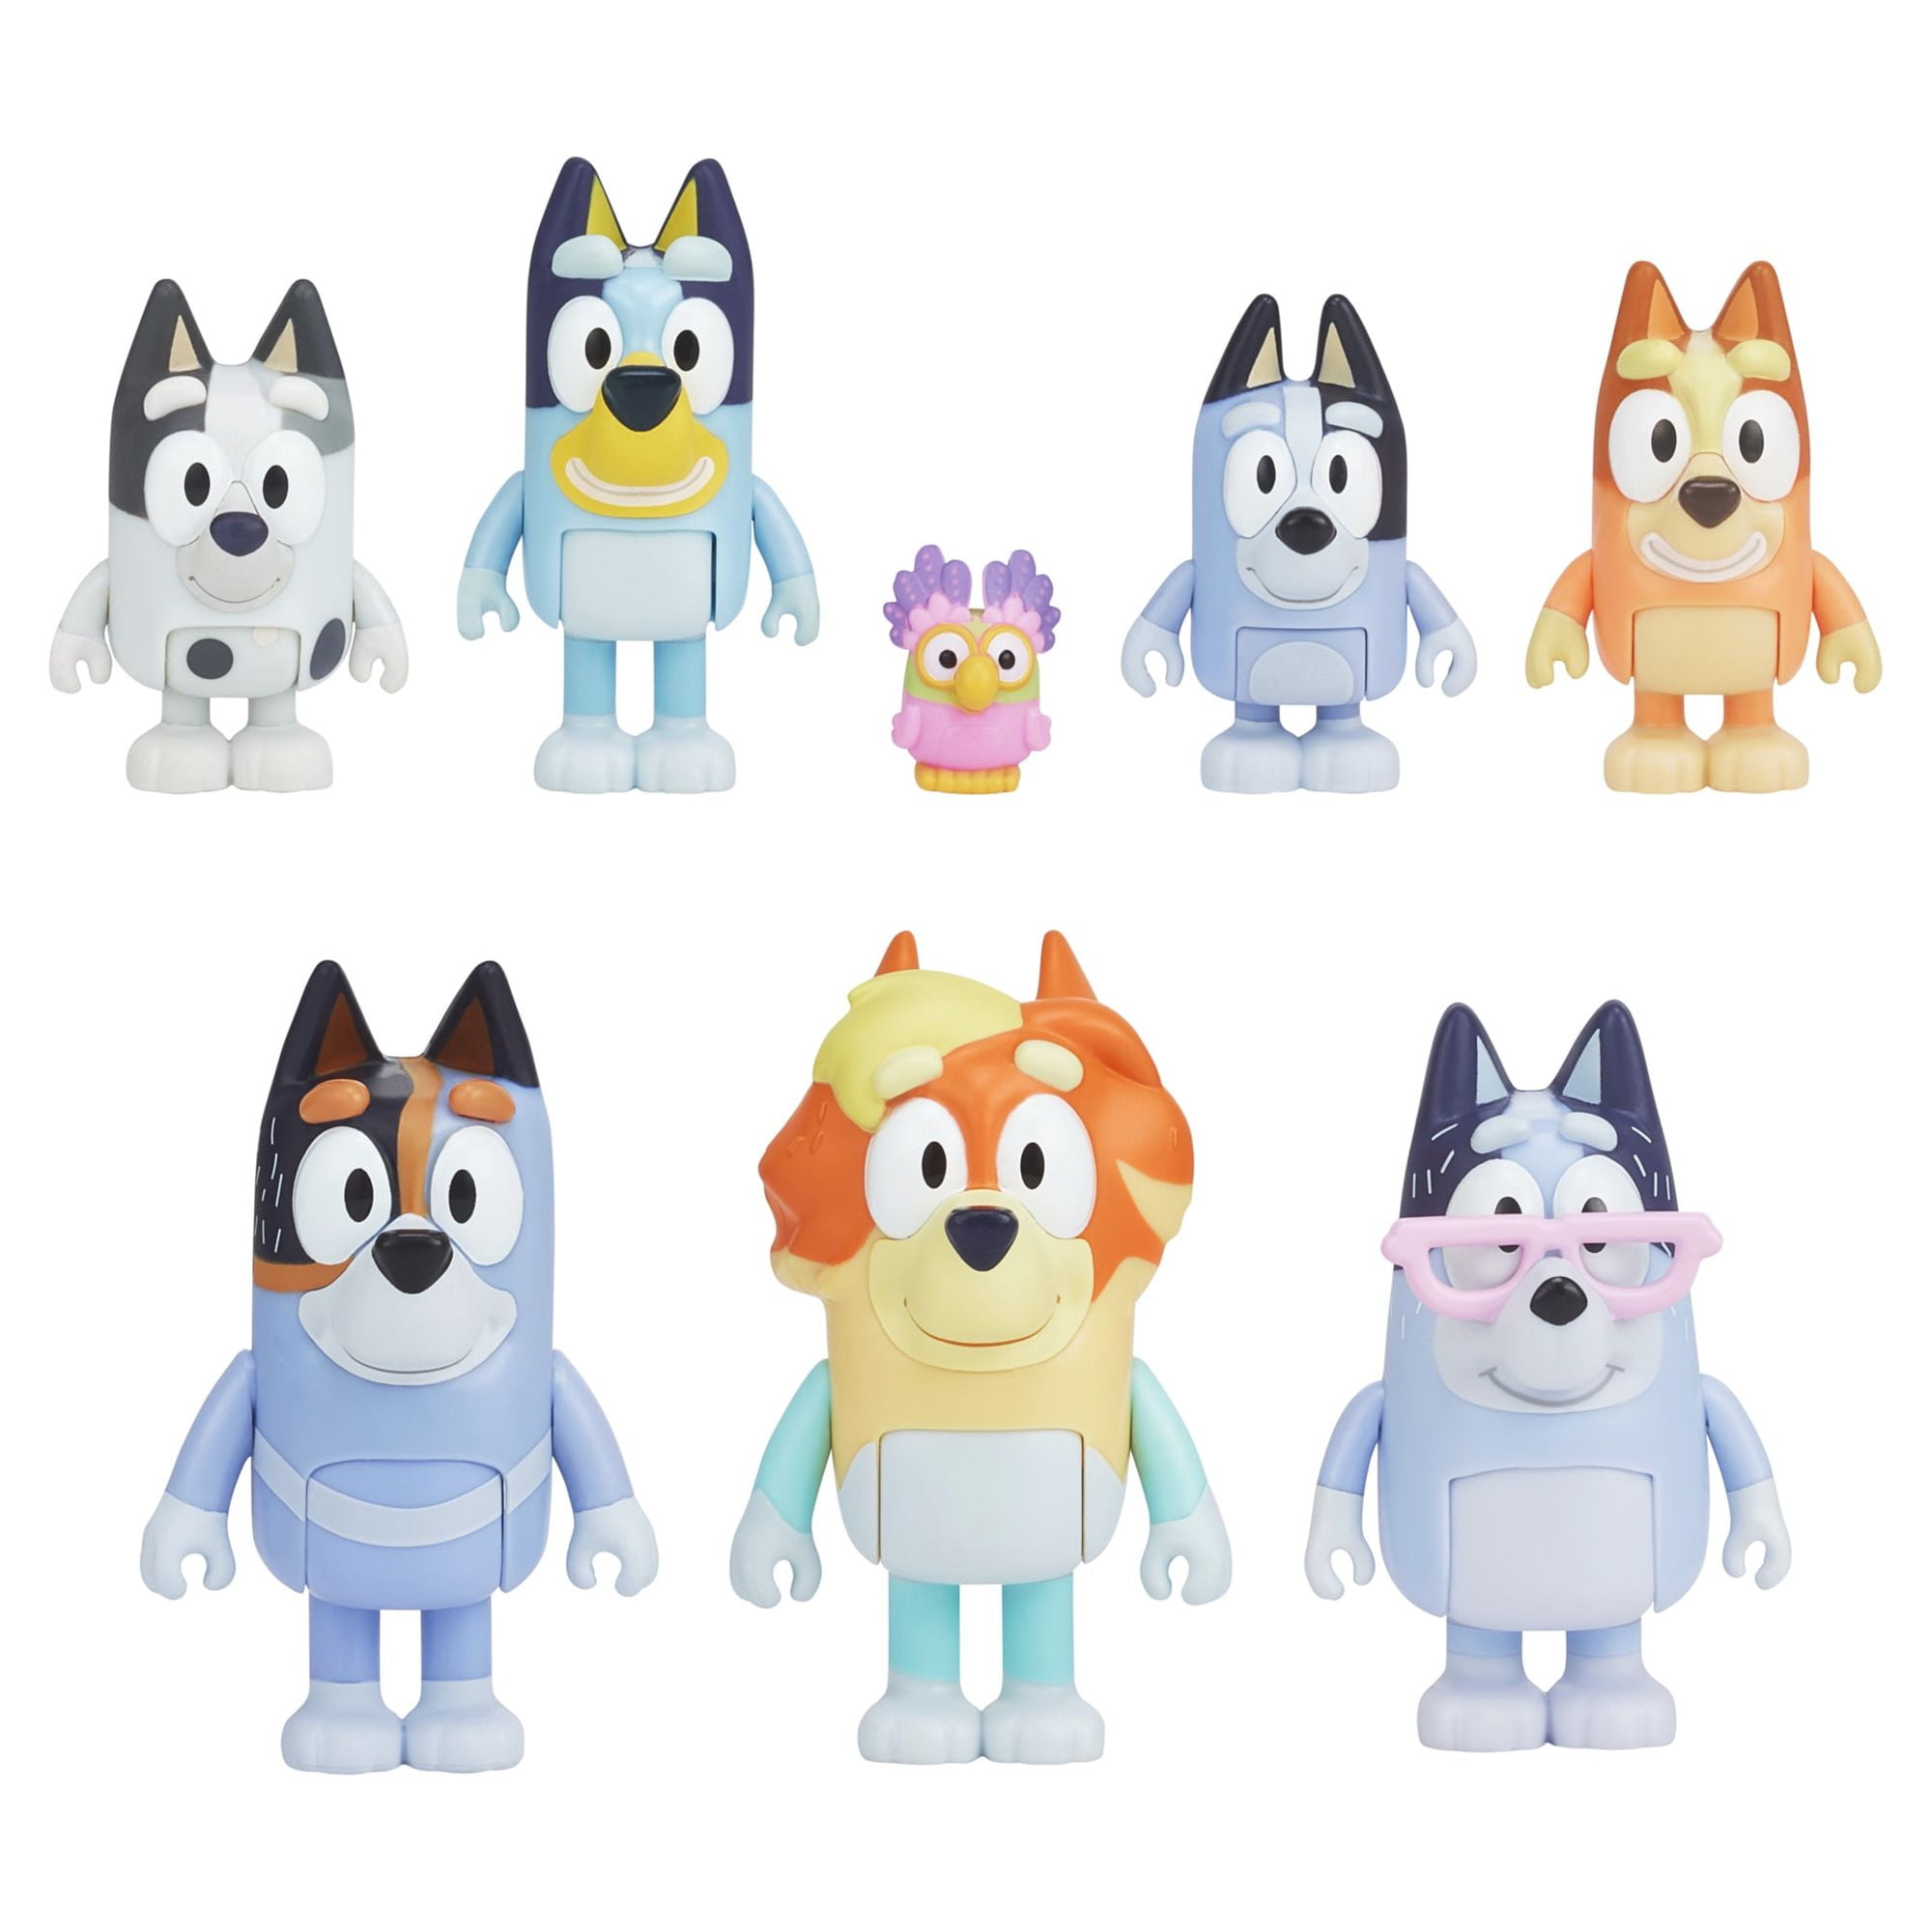 Bluey, Extended Heeler Family Pack, 2.5-3 inch Figures, Bluey, Bingo,  Socks, Muffin, Uncle Stripe, Uncle Rad, Nana and Chattermax, Preschool,  Toys for